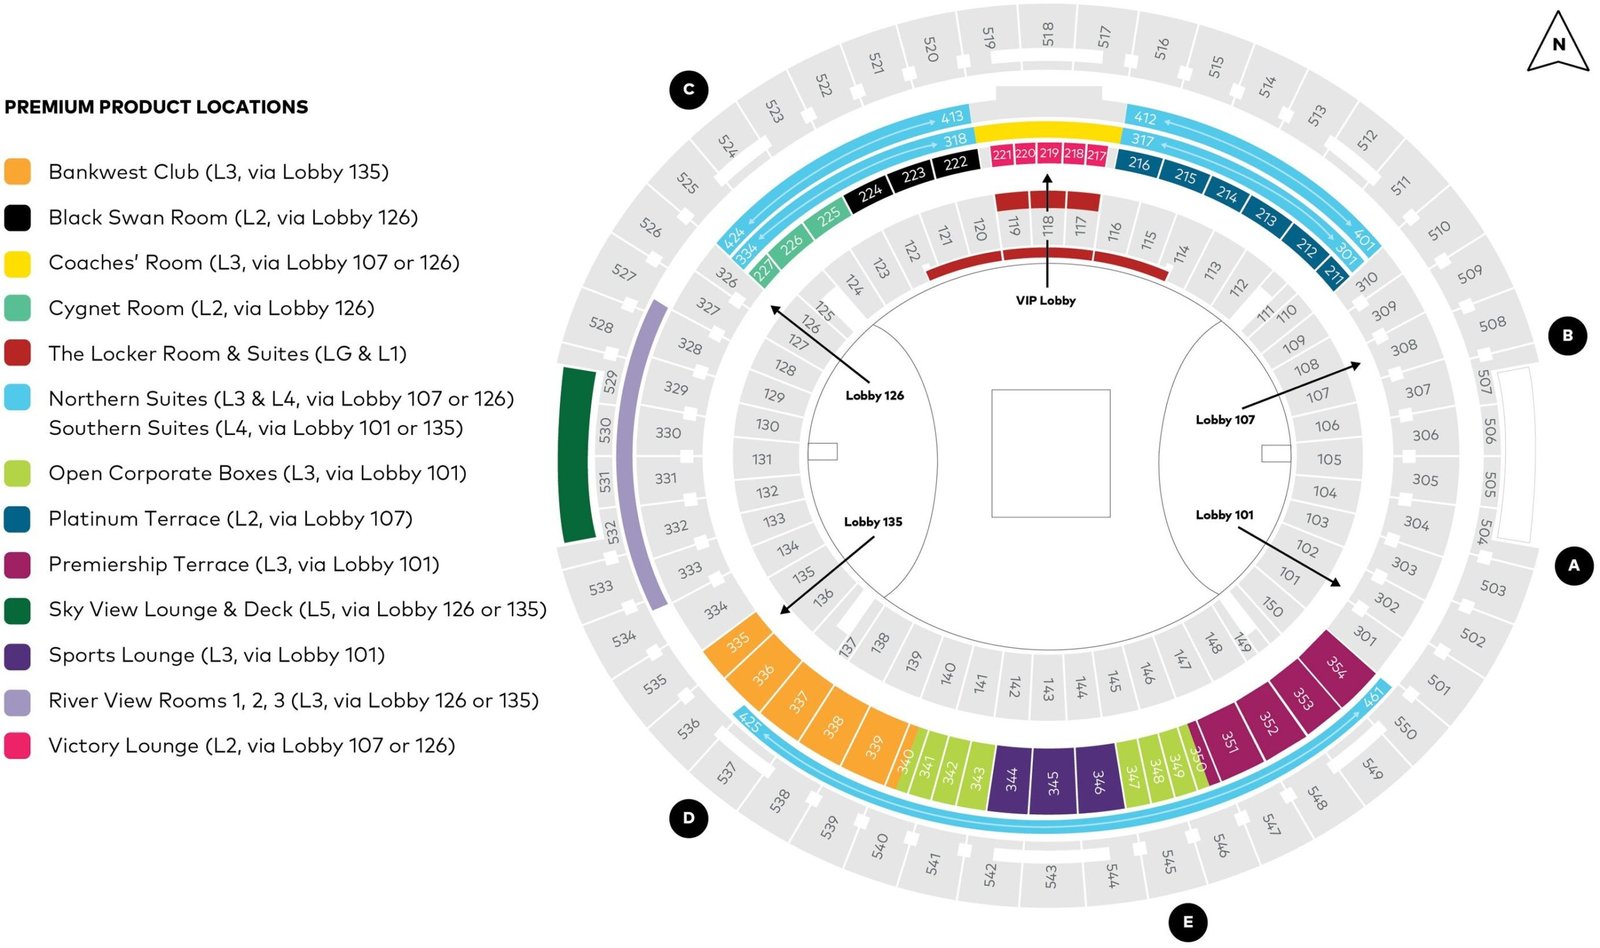 Optus Stadium Seating Map with Seat numbers, rows and stands